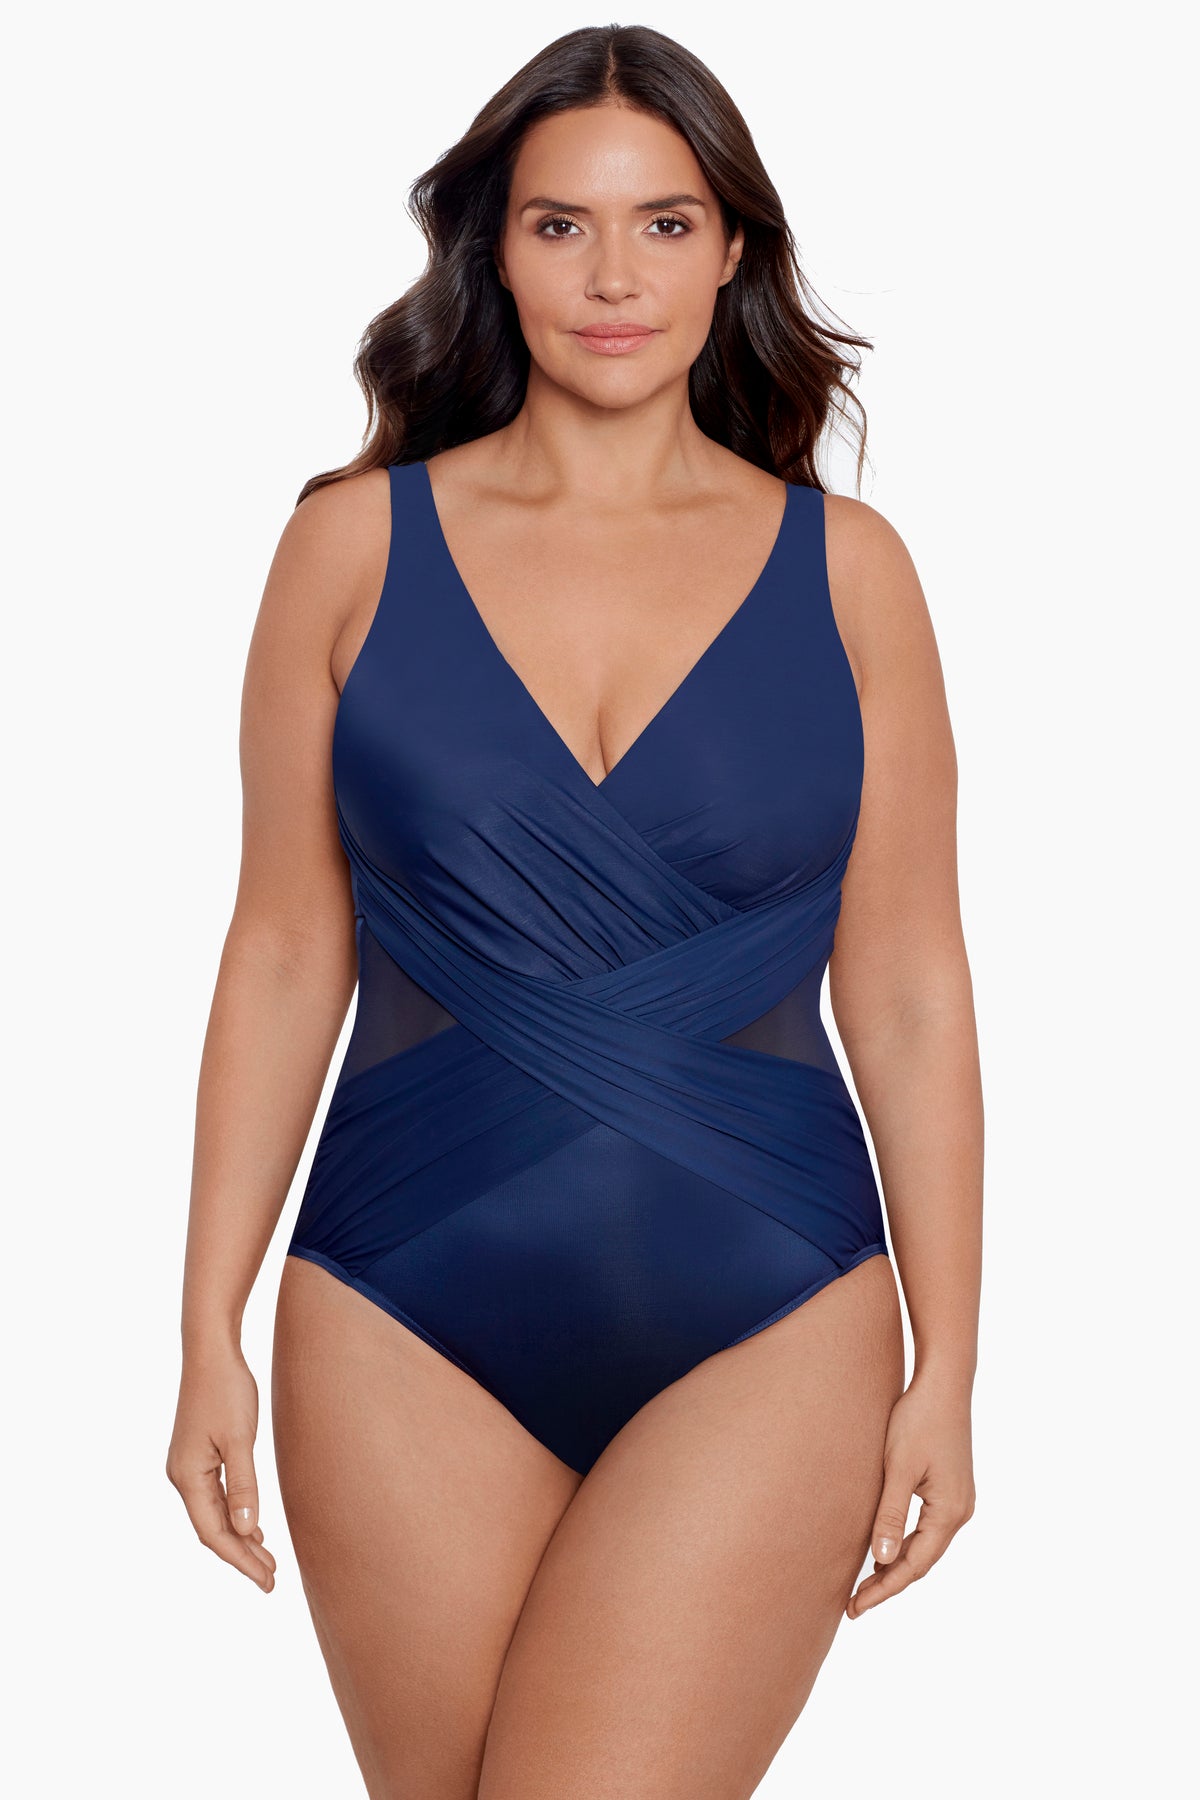 Plus Size Crossover One Piece Swimsuit